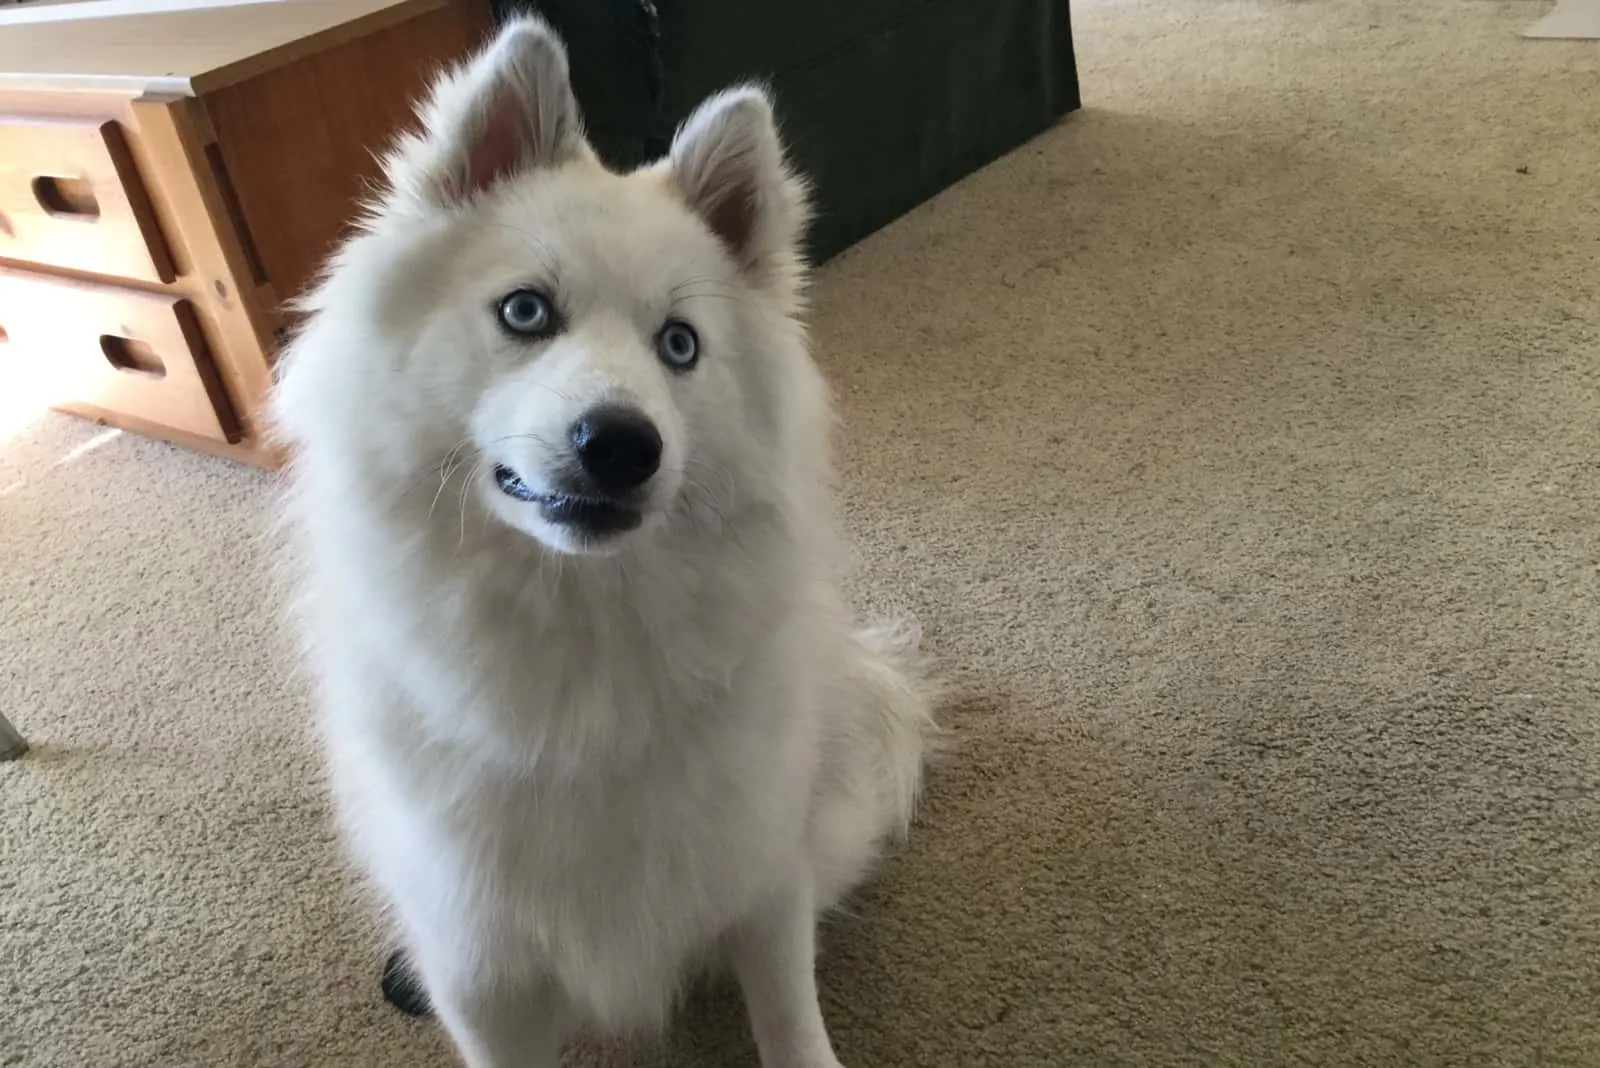 a white pomsky dog sits on the floor of the room and watches something